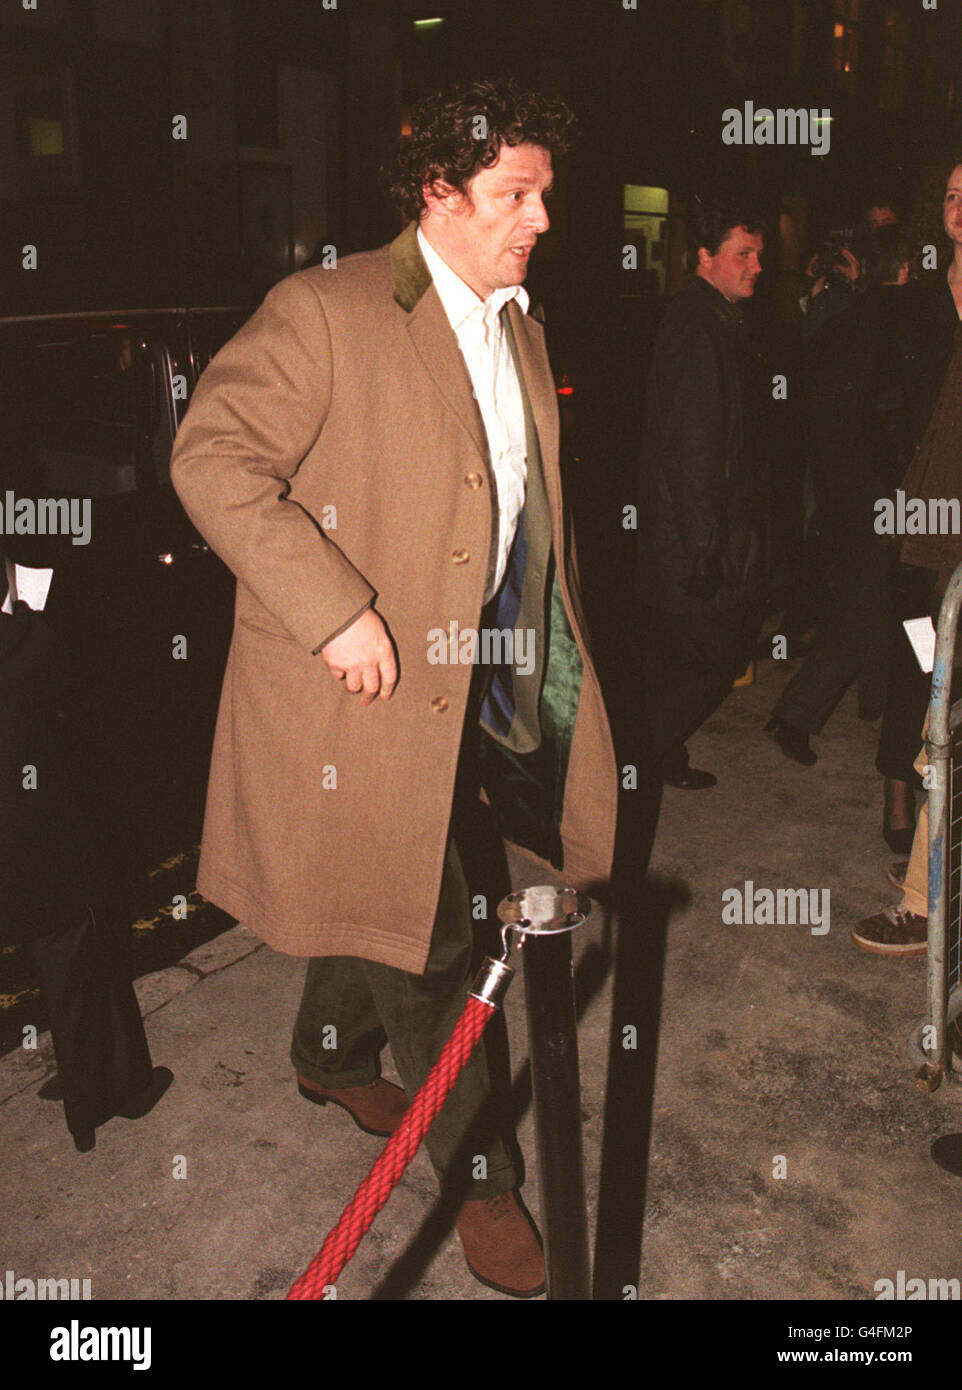 PA NEWS PHOTO 1/12/98 ARRIVING FOR THE TATLER CHRISTMAS PARTY AT MARCO PIERRE WHITE'S 'TITANIC' BAR/RESTAURANT IN LONDON. Stock Photo